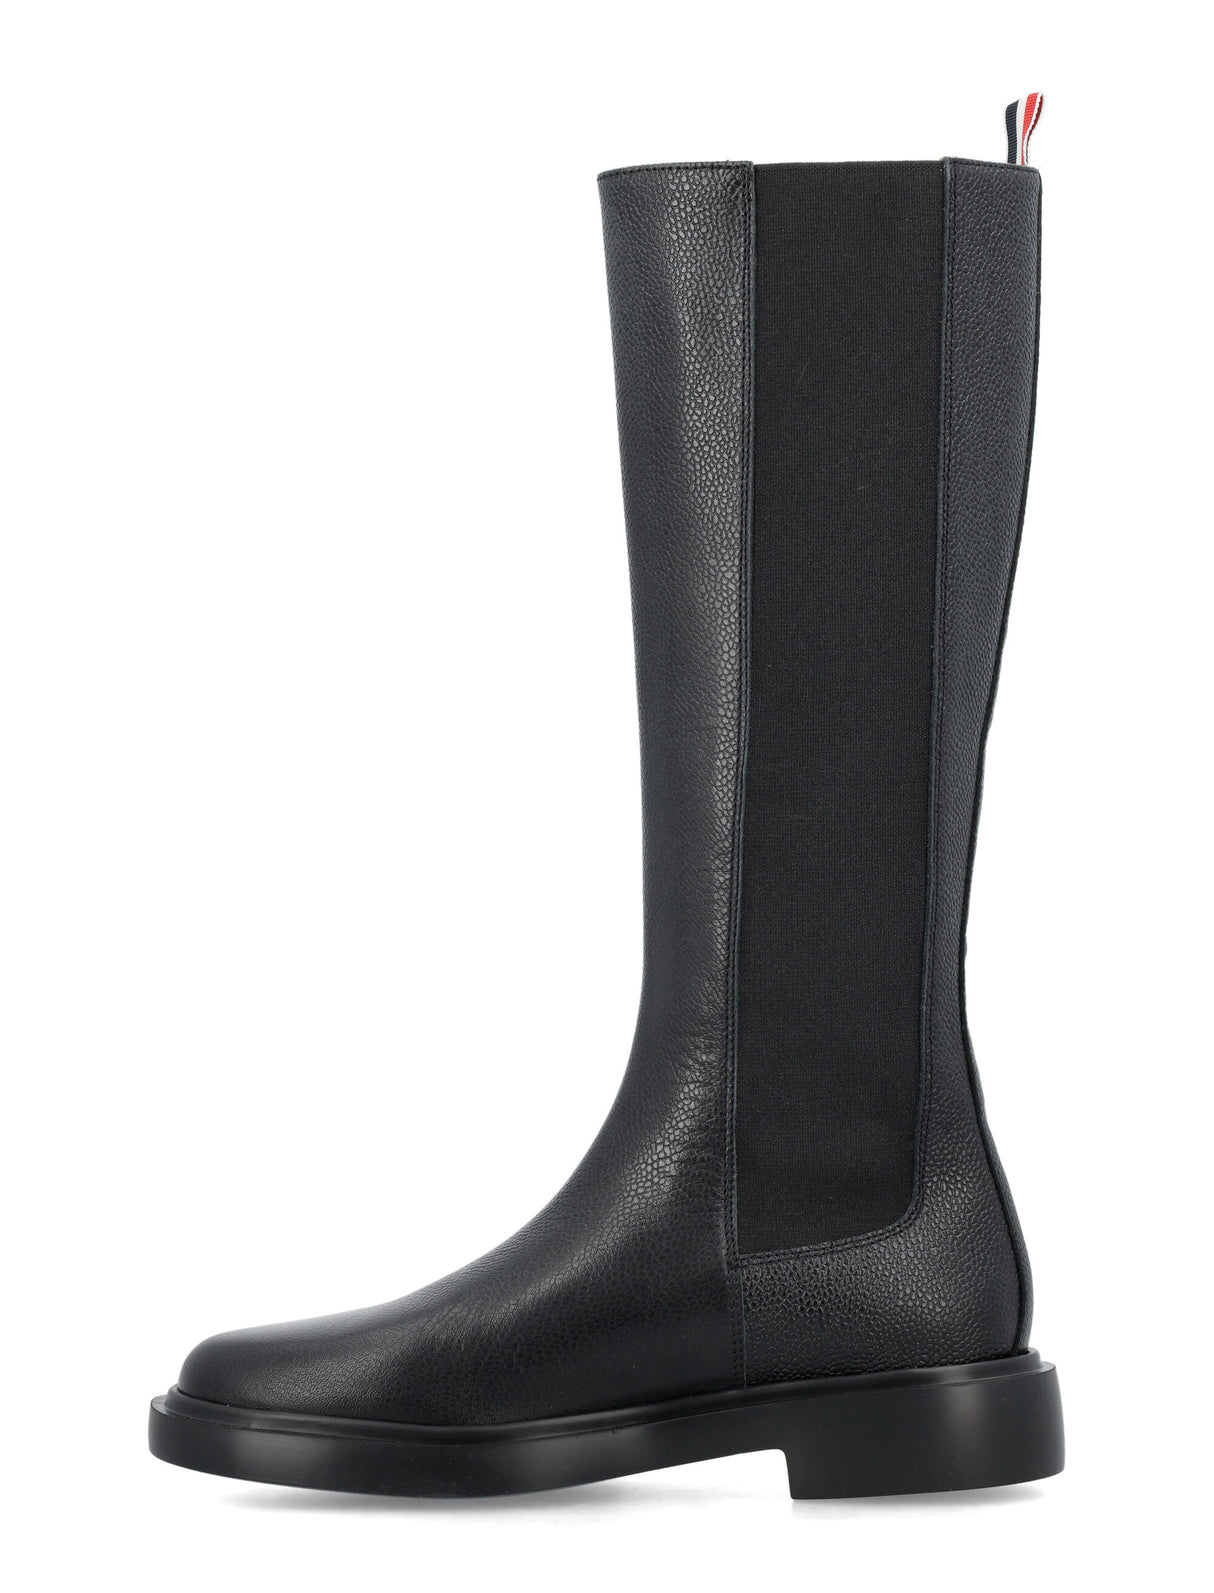 THOM BROWNE Classic Women's Black Leather Chelsea Boots